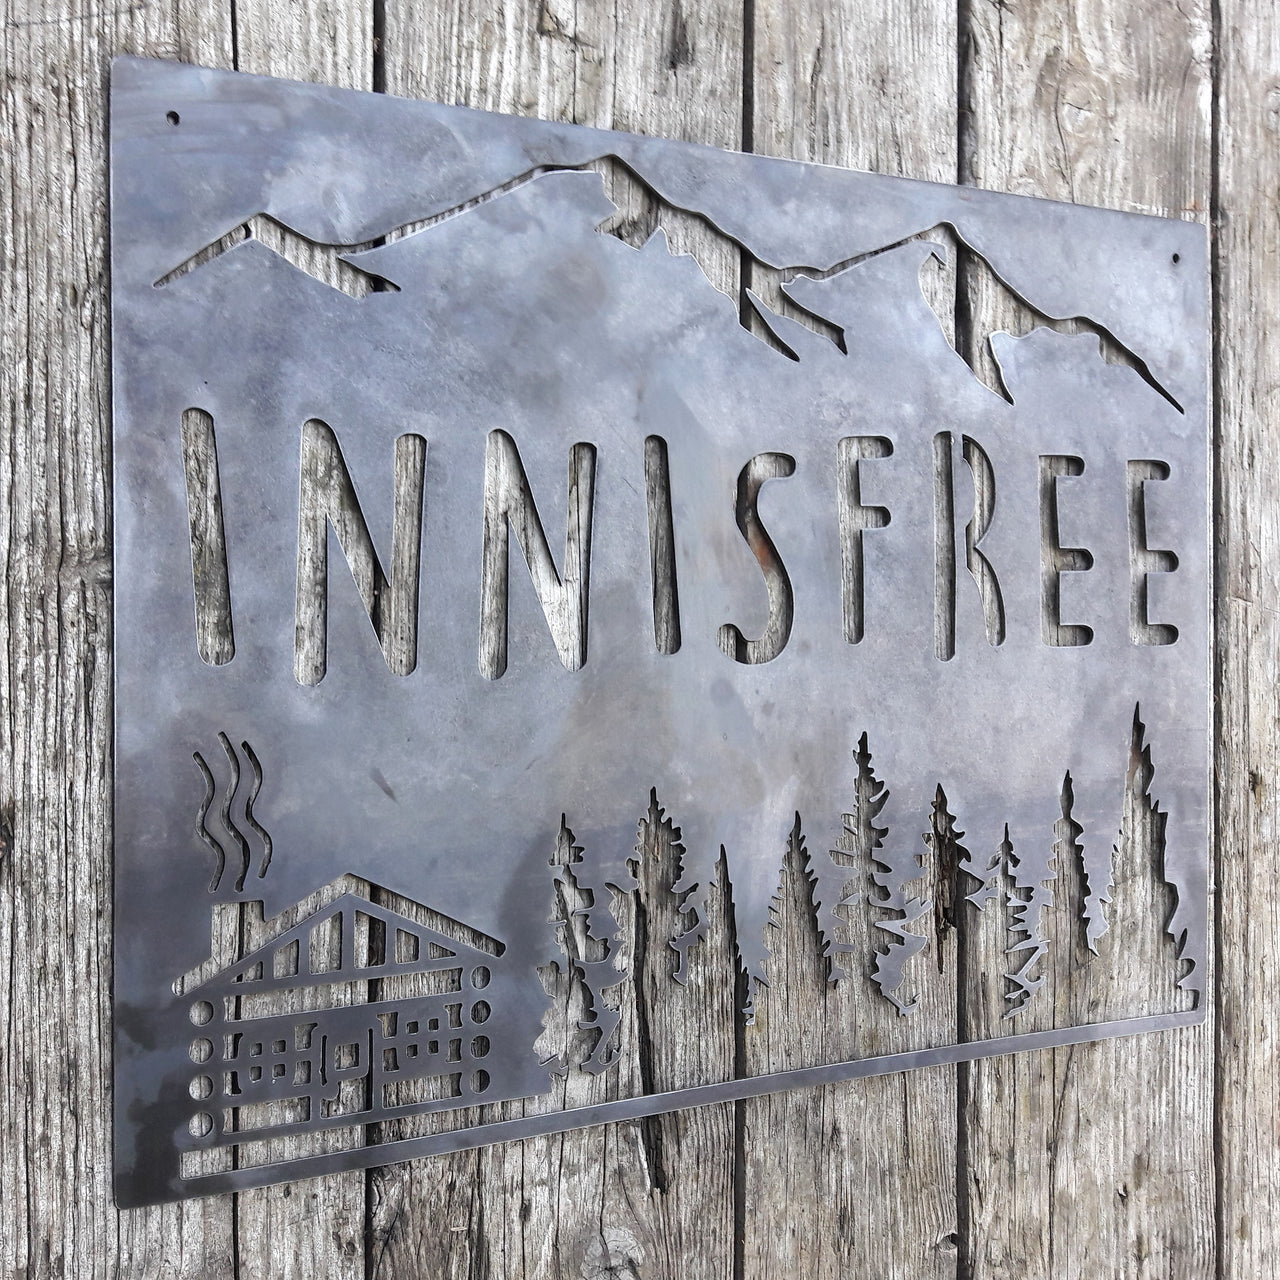 This sign is displays a mountain range in the background with a forest and cabin. The sign reads, "INNISFREE".